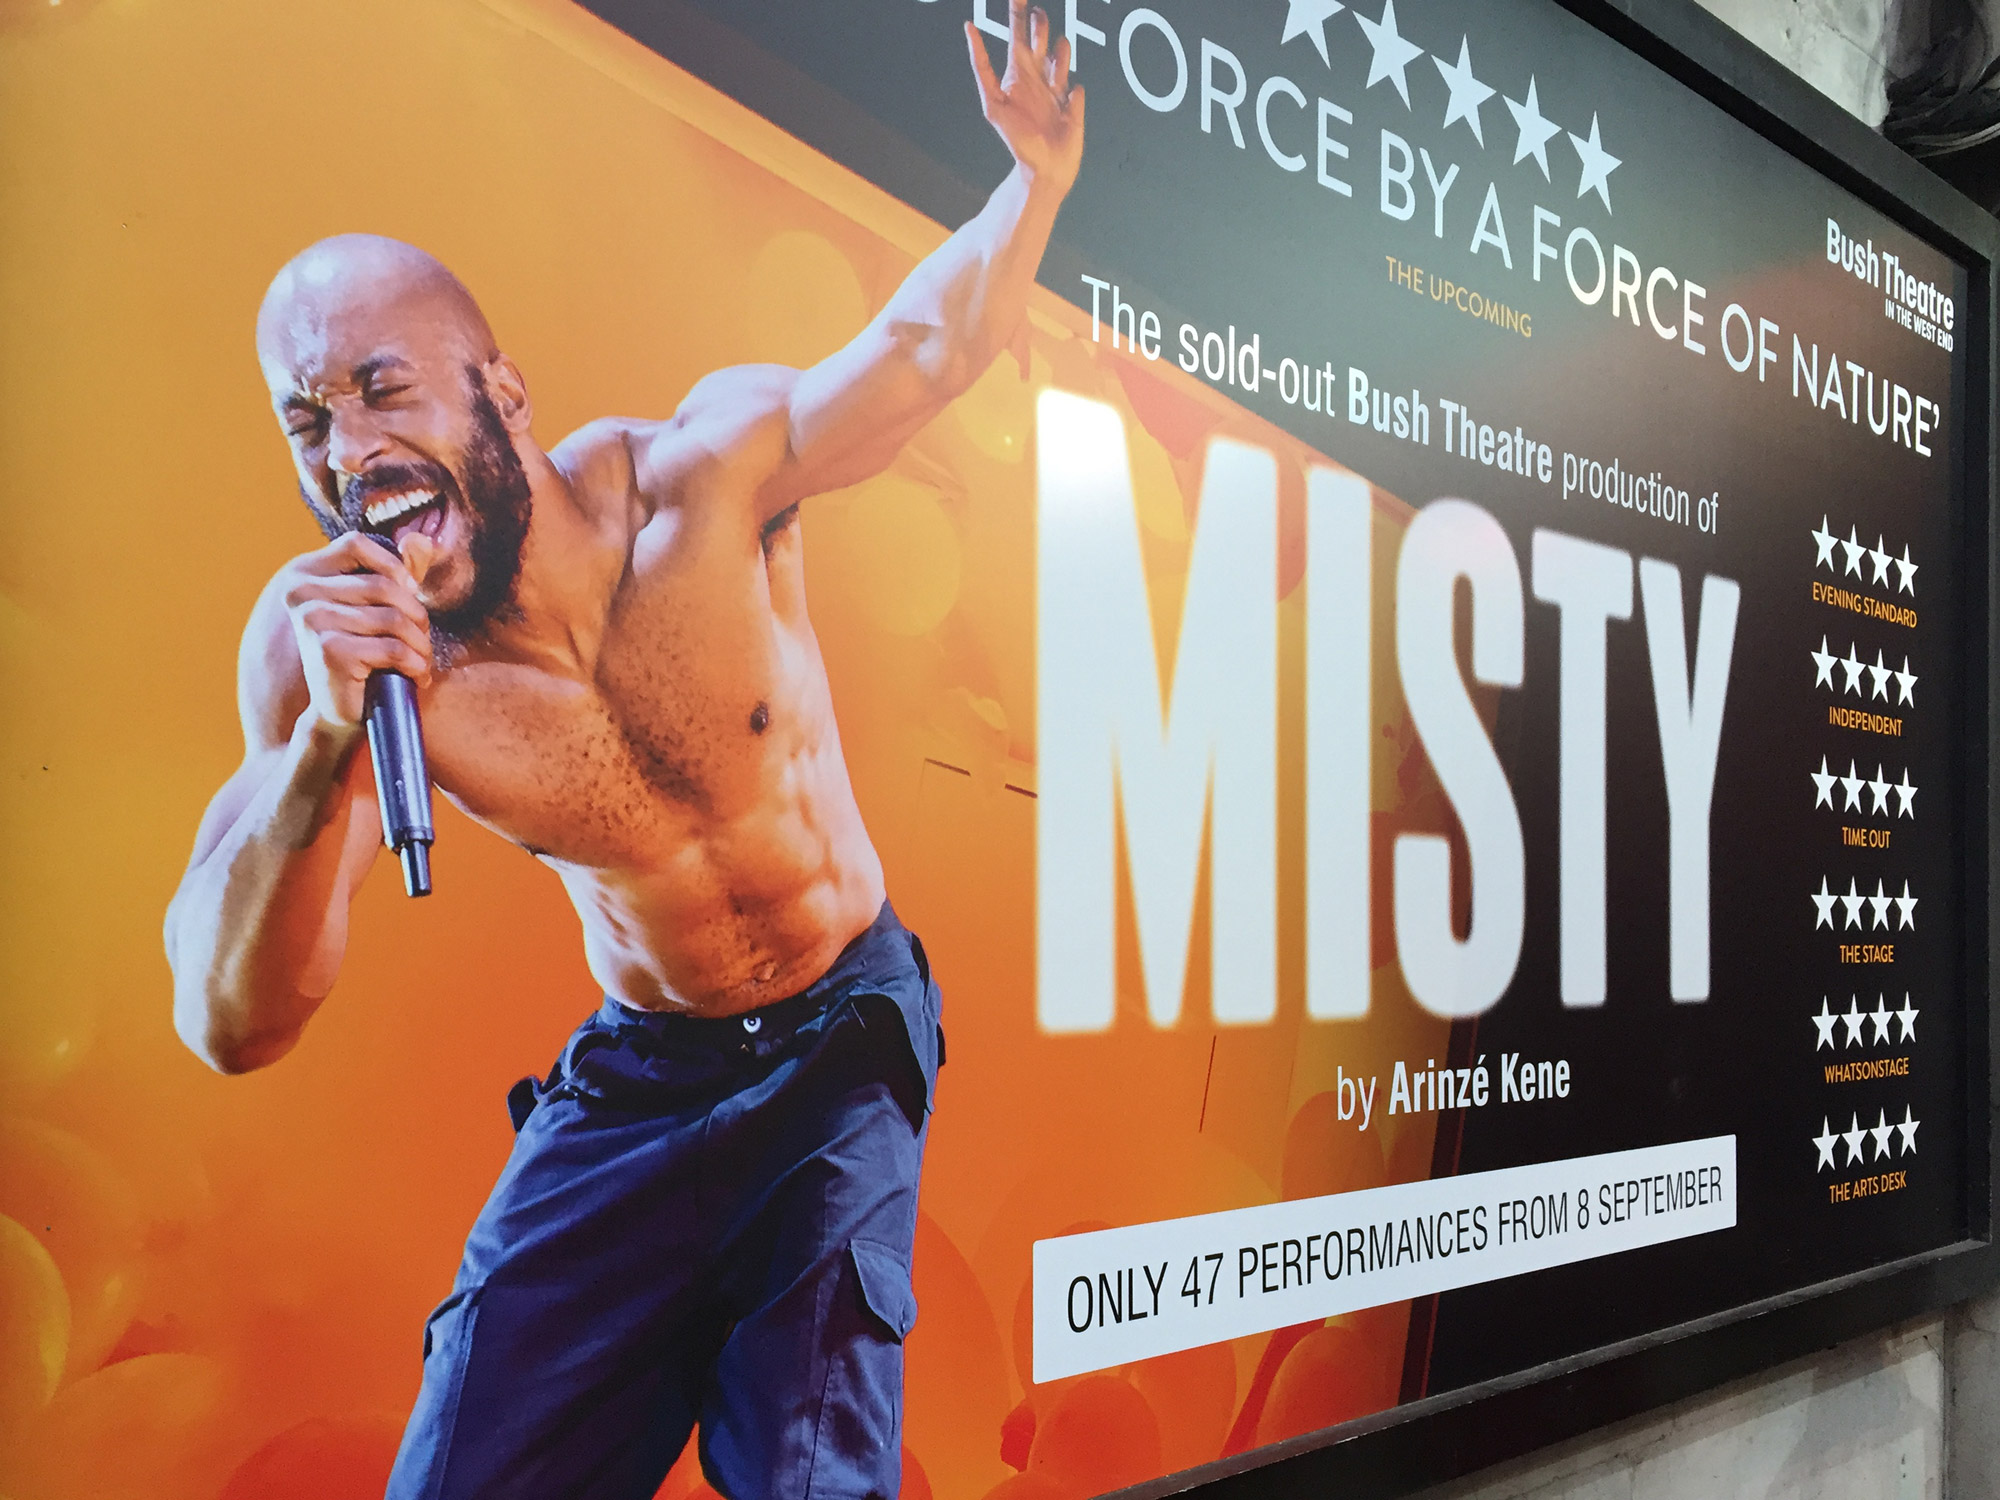 On an orange background, a landscape poster shows a muscly man, with bald head and beard, singing into a microphone. Beside him is the word MISTY...